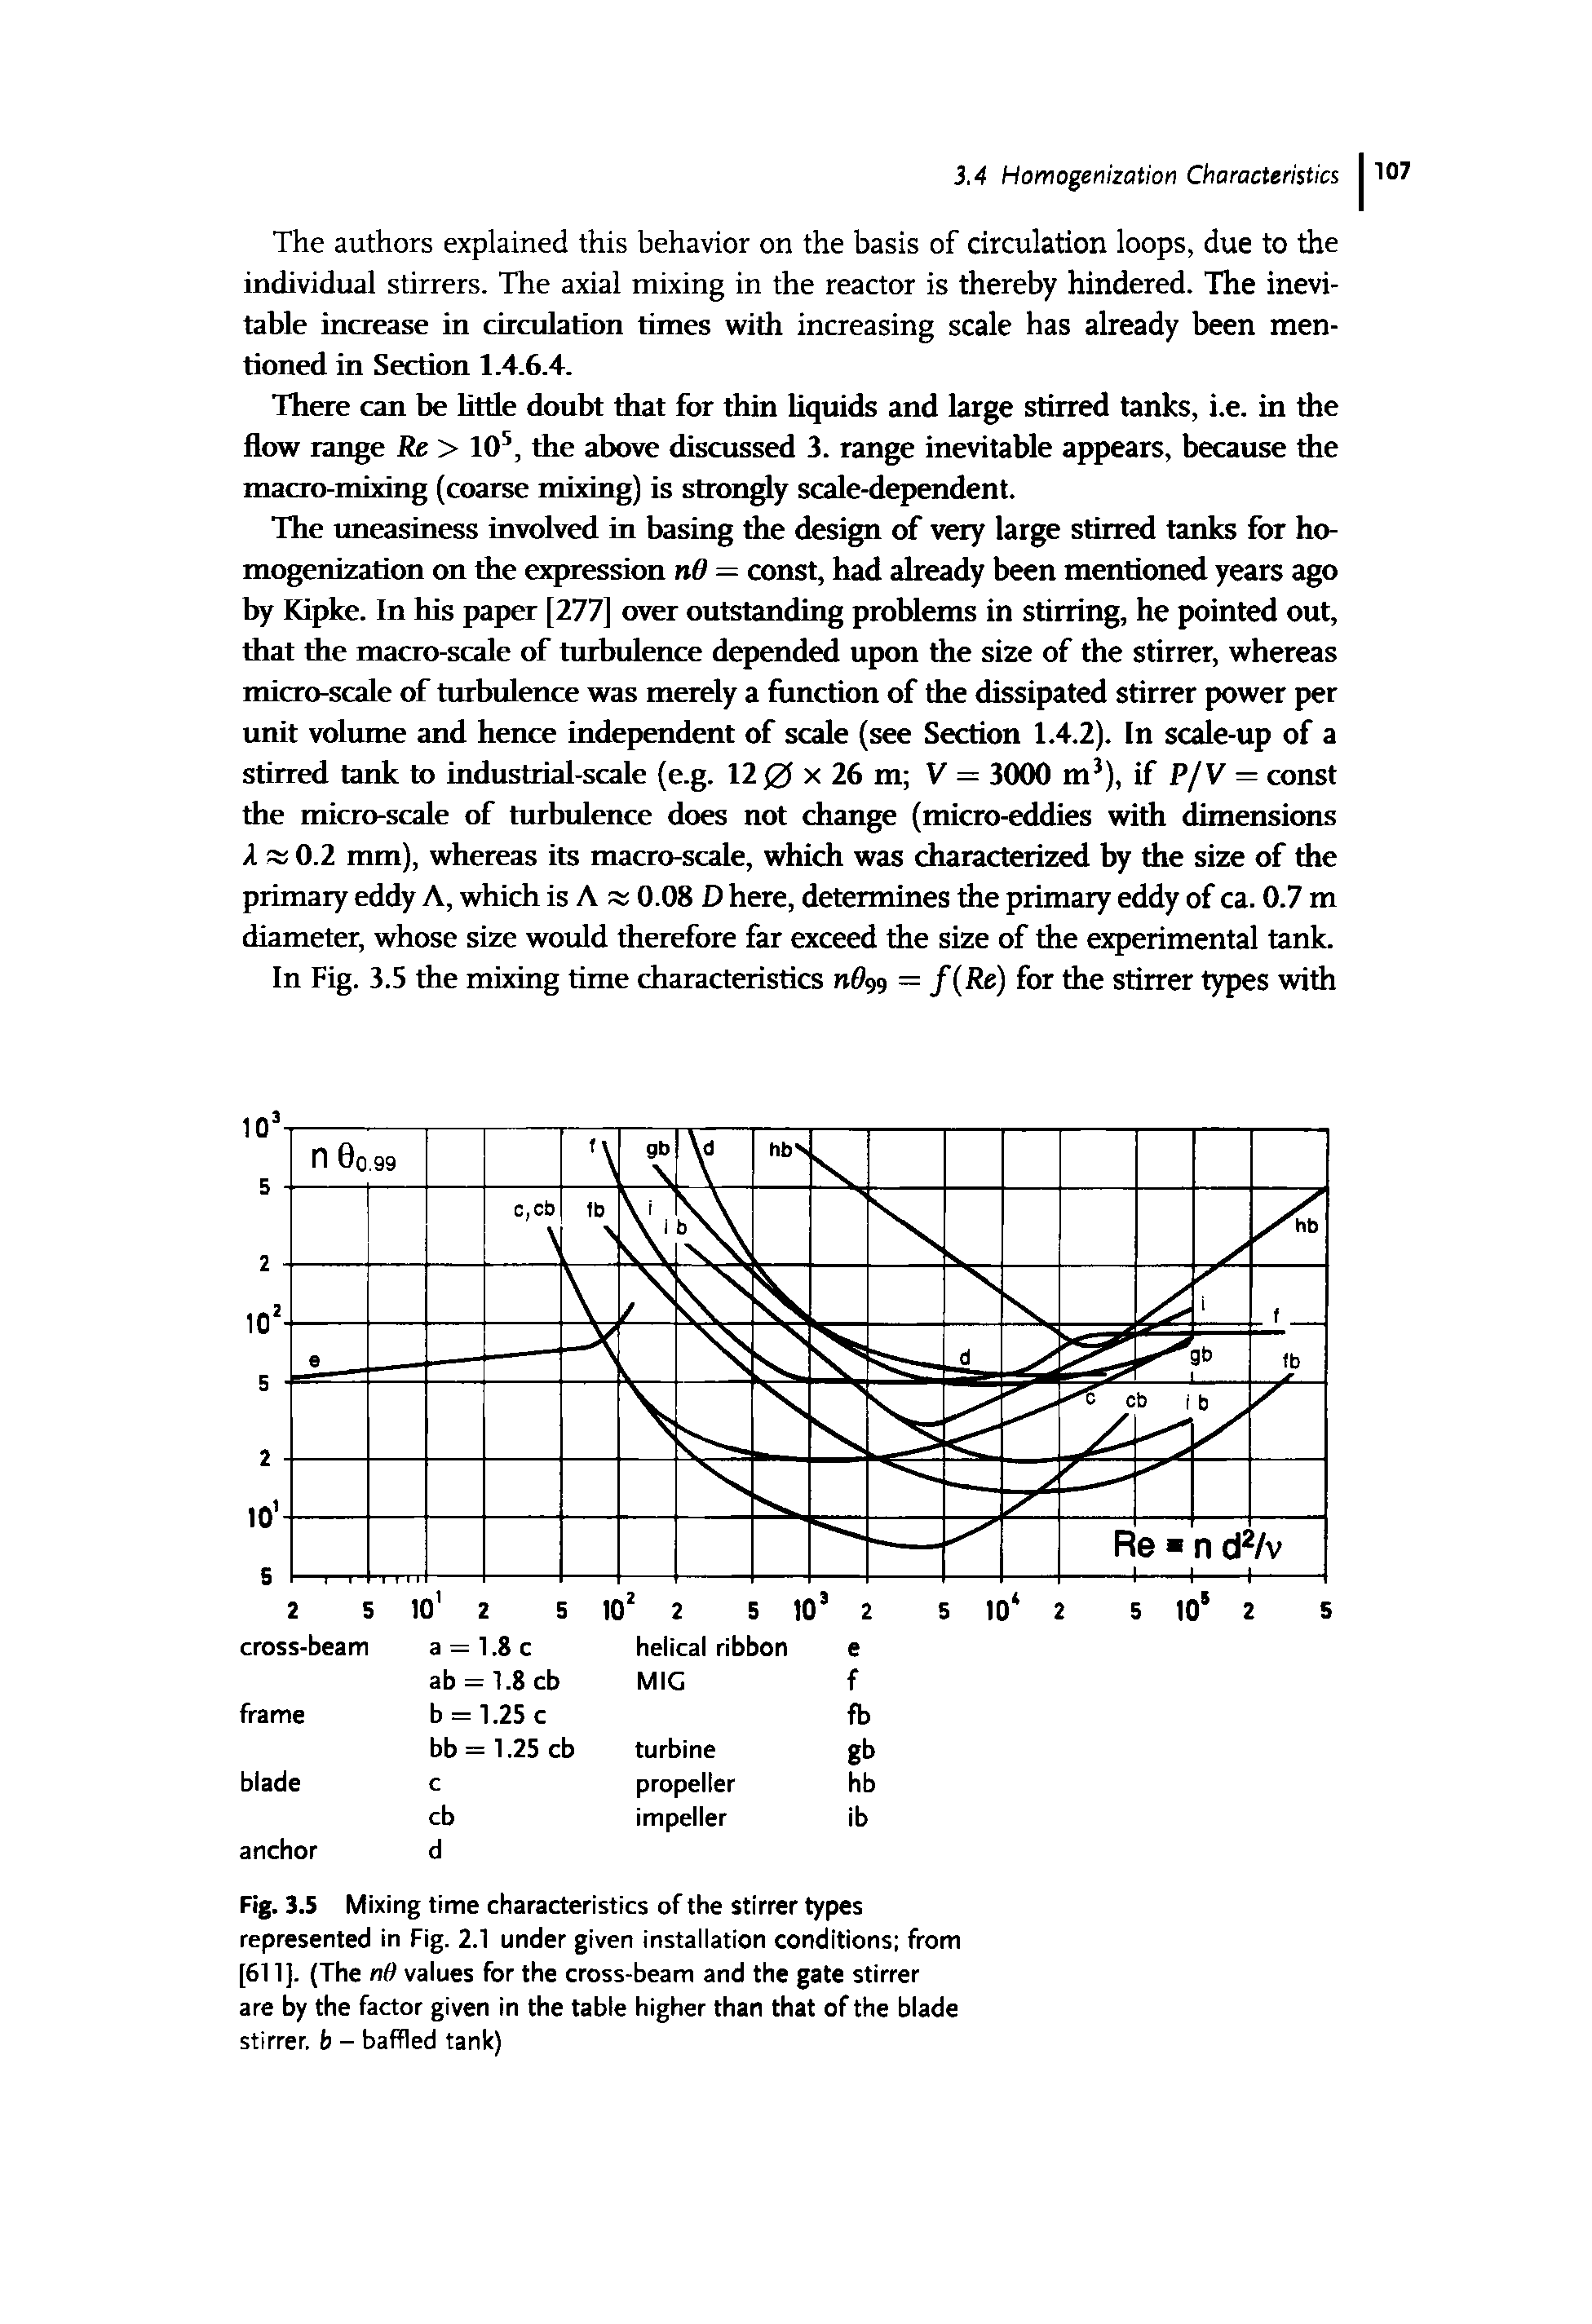 Fig. 3.5 Mixing time characteristics of the stirrer types represented in Fig. 2.1 under given installation conditions from [611]. (The nD values for the cross-beam and the gate stirrer are by the factor given in the table higher than that of the blade stirrer, b - baffled tank)...